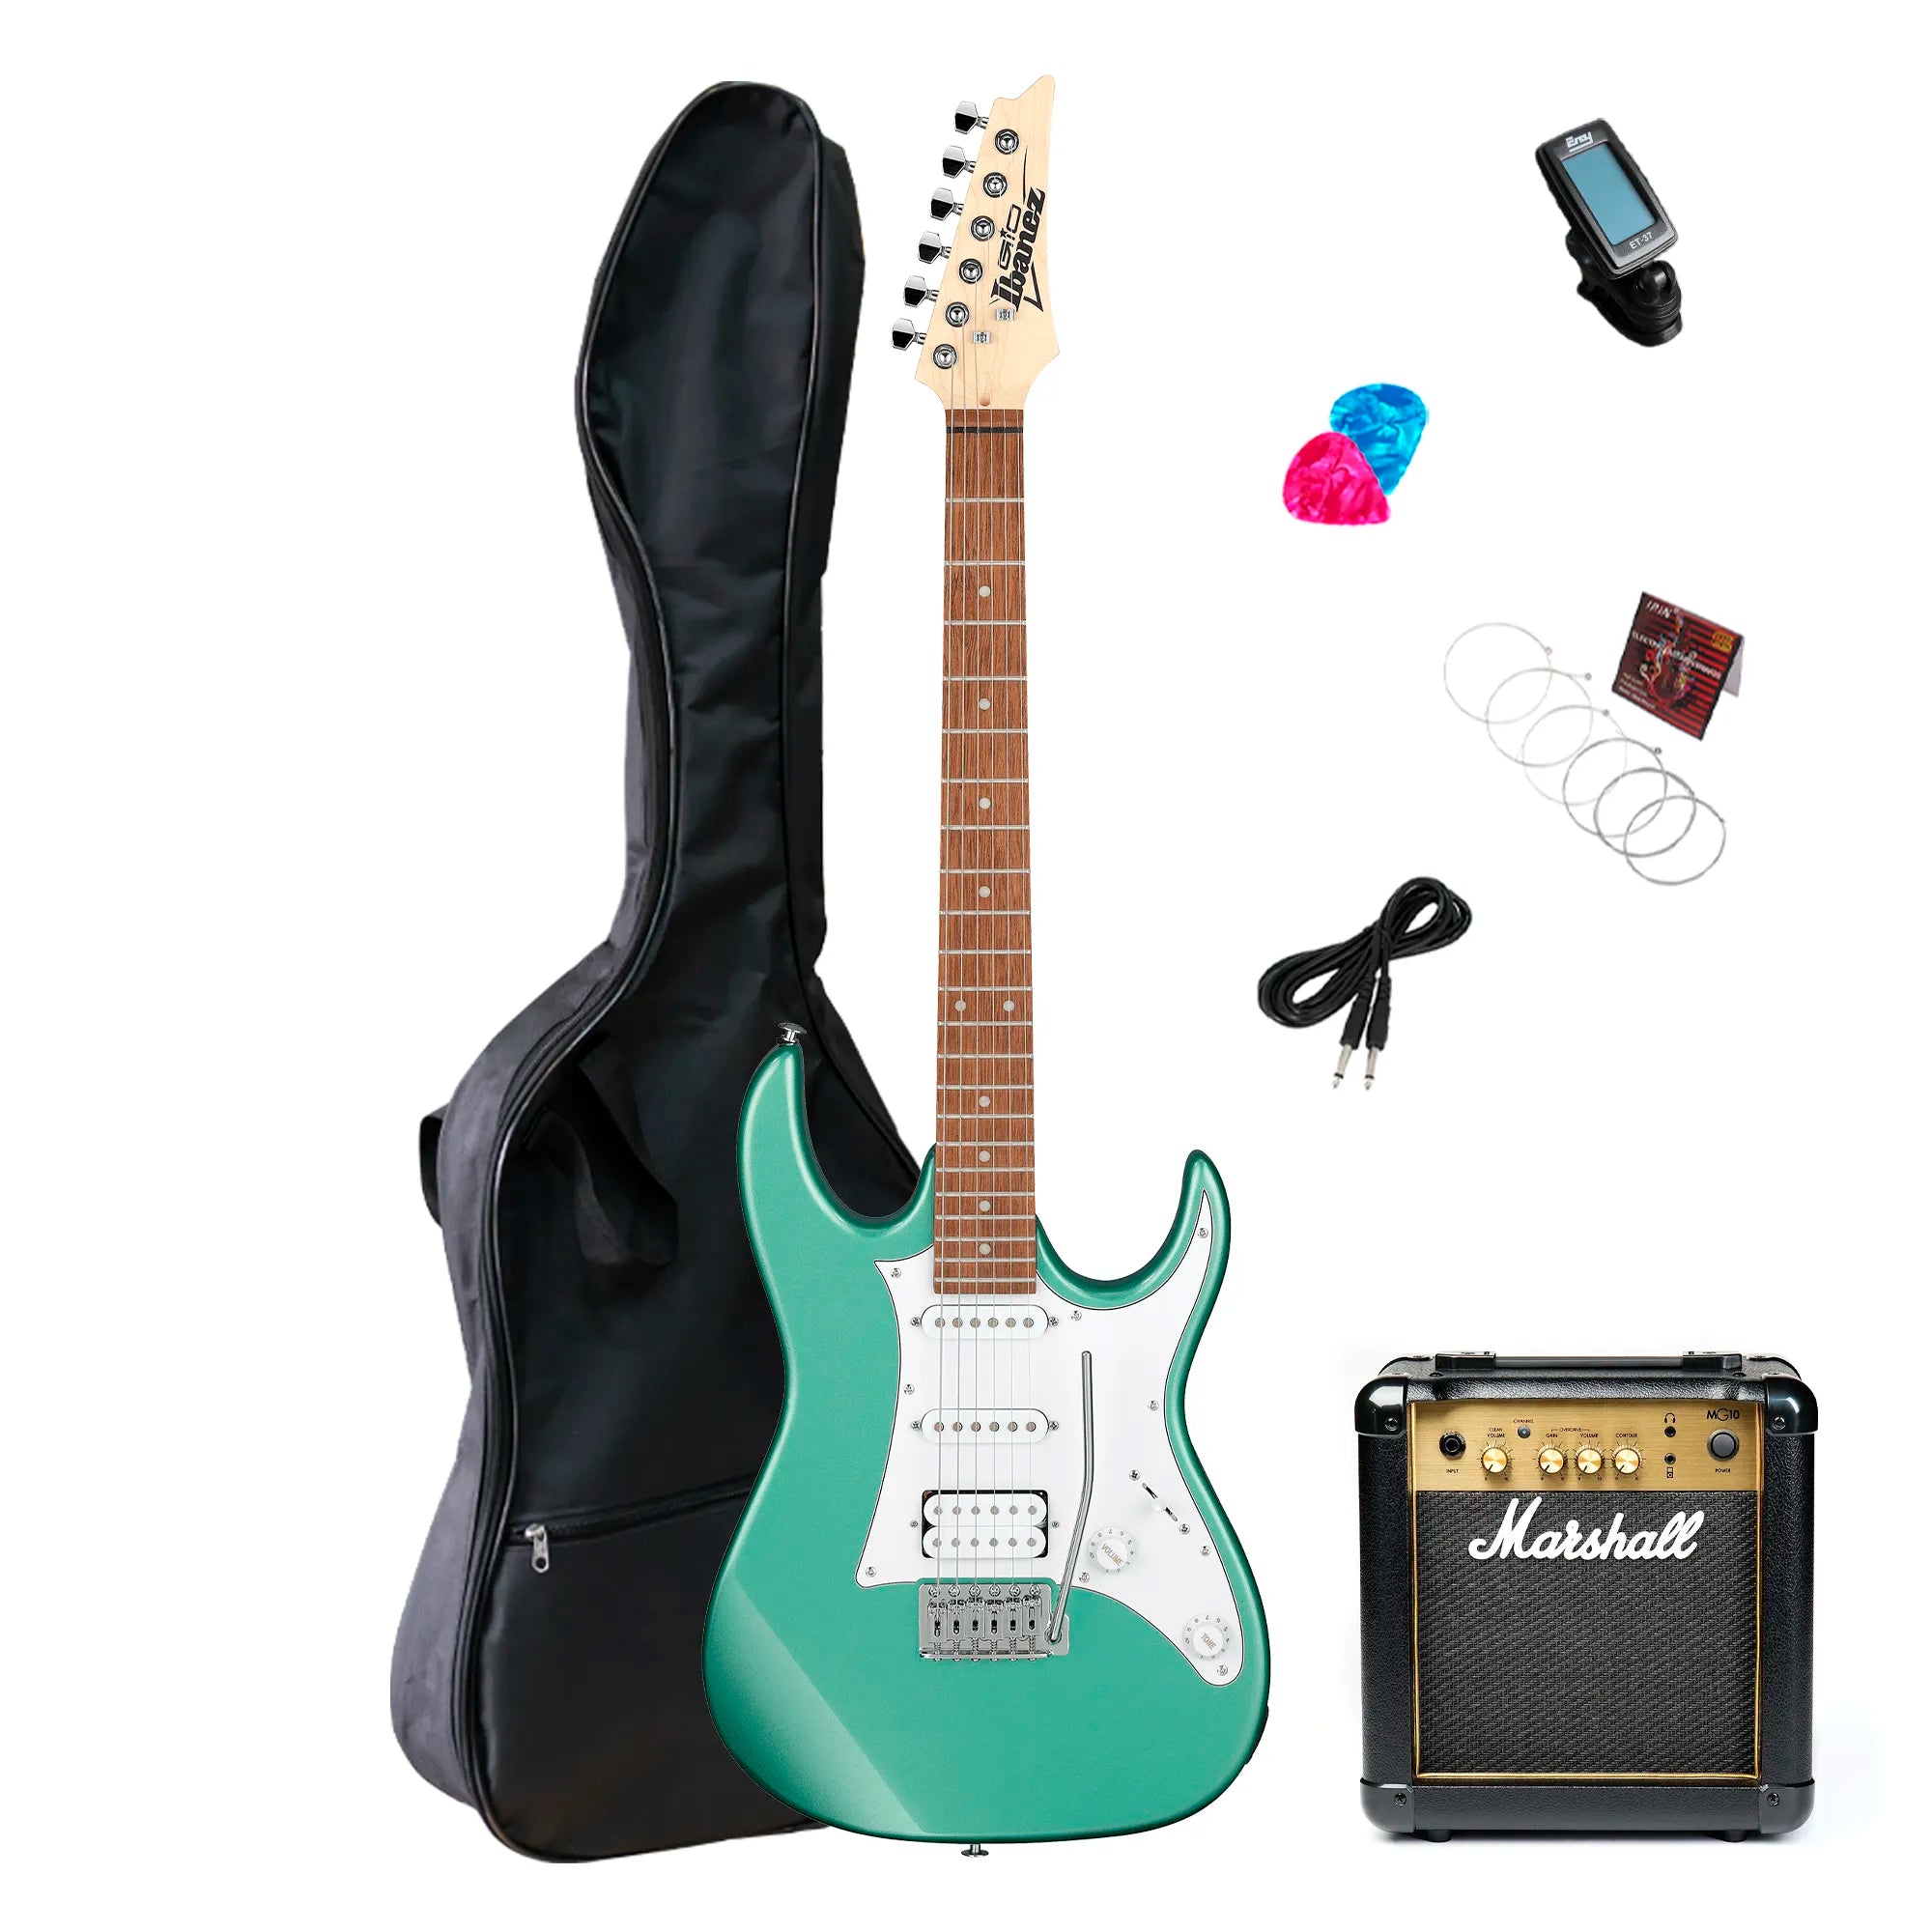 Pack Guitarra Electrica Ibanez GRX40-MGN con amplificador Marshall